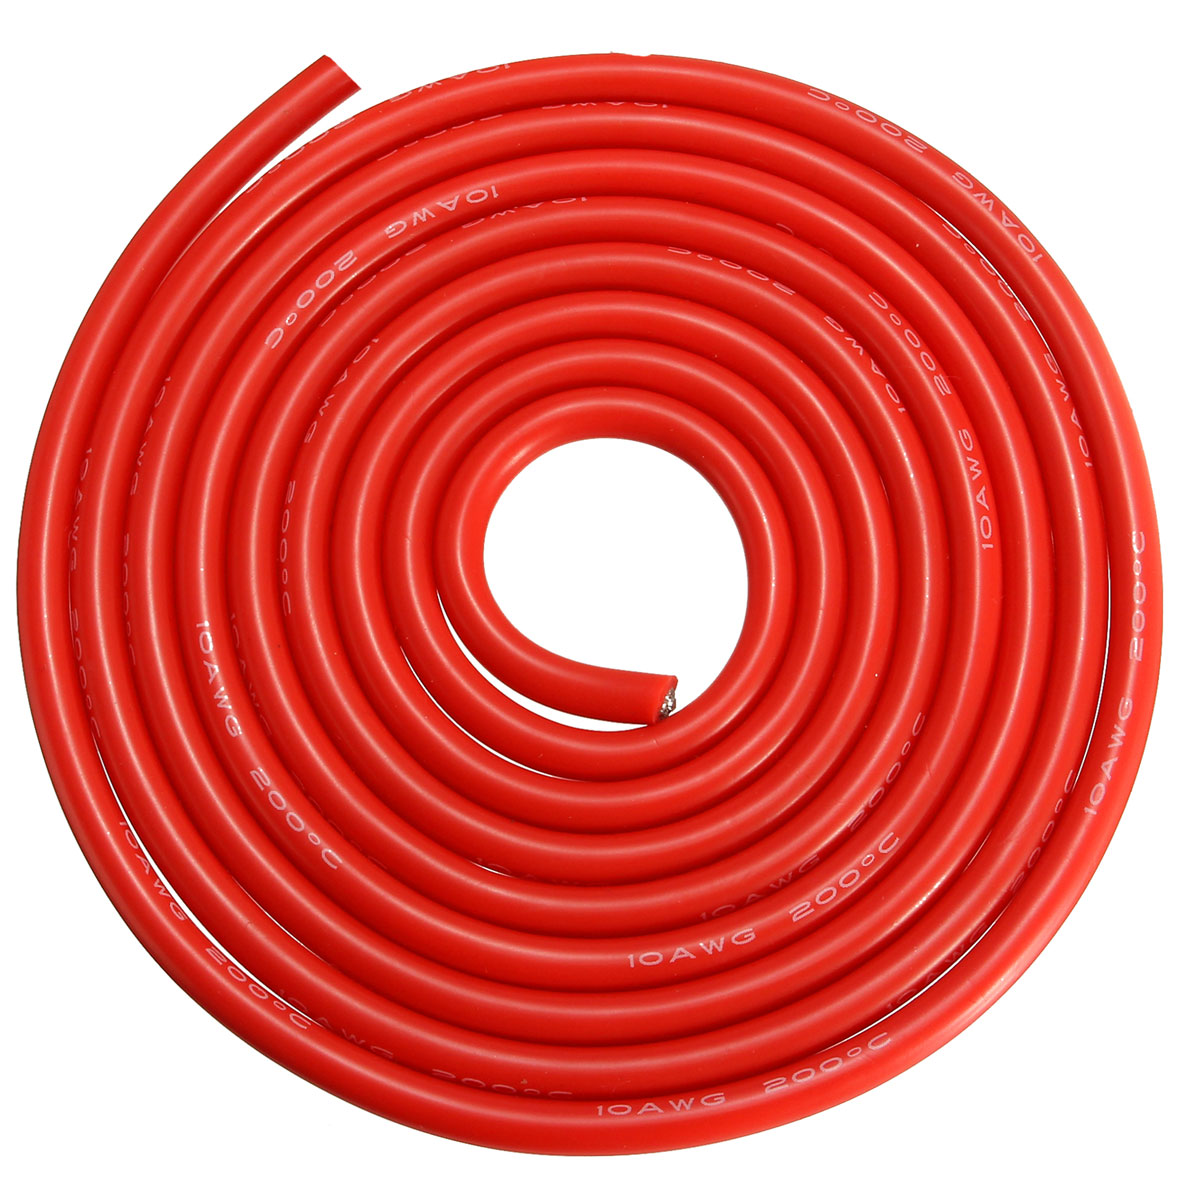 DANIU-2-Meter-Red-Silicone-Wire-Cable-10121416182022AWG-Flexible-Cable-1170284-2